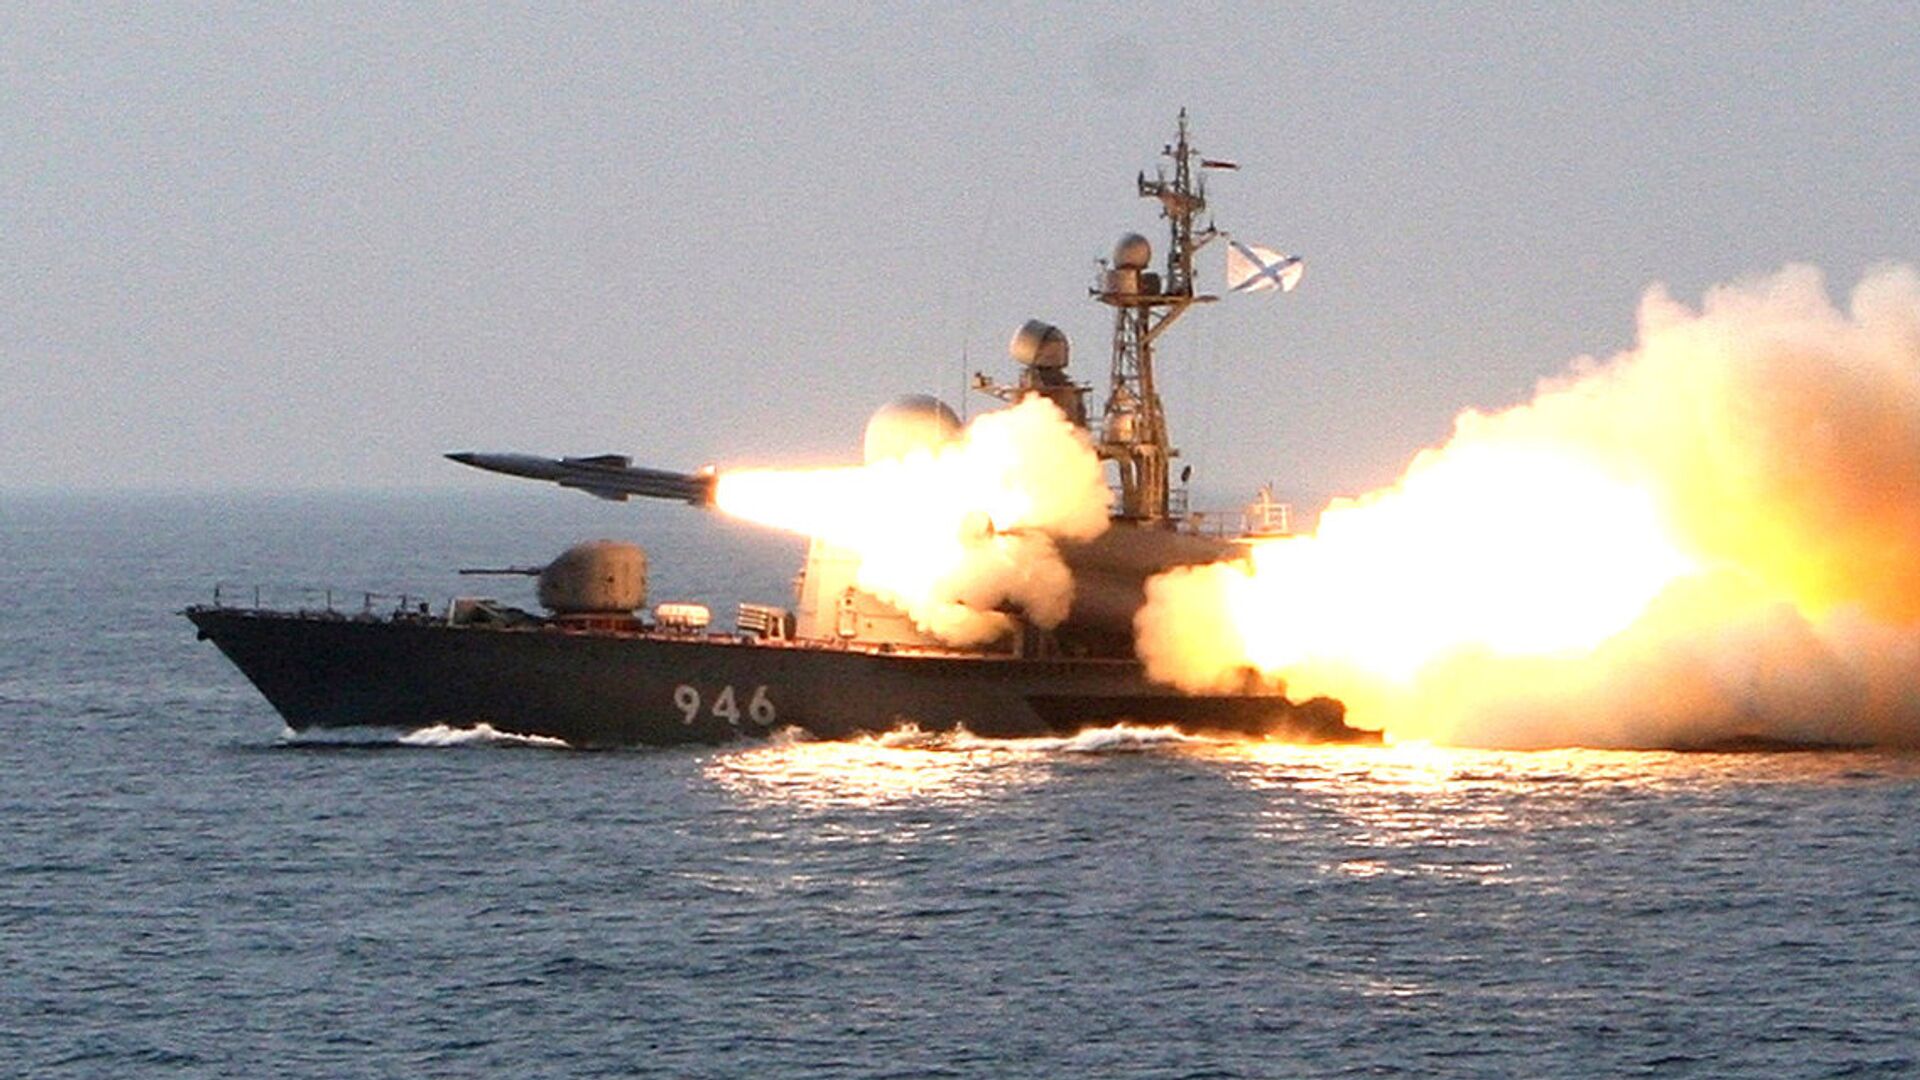 A Moskit supersonic anti-ship missile is launched from a missile boat during a training exercise for guard missile boats and artillery exercises held in the Sea of Japan. - Sputnik India, 1920, 28.03.2023